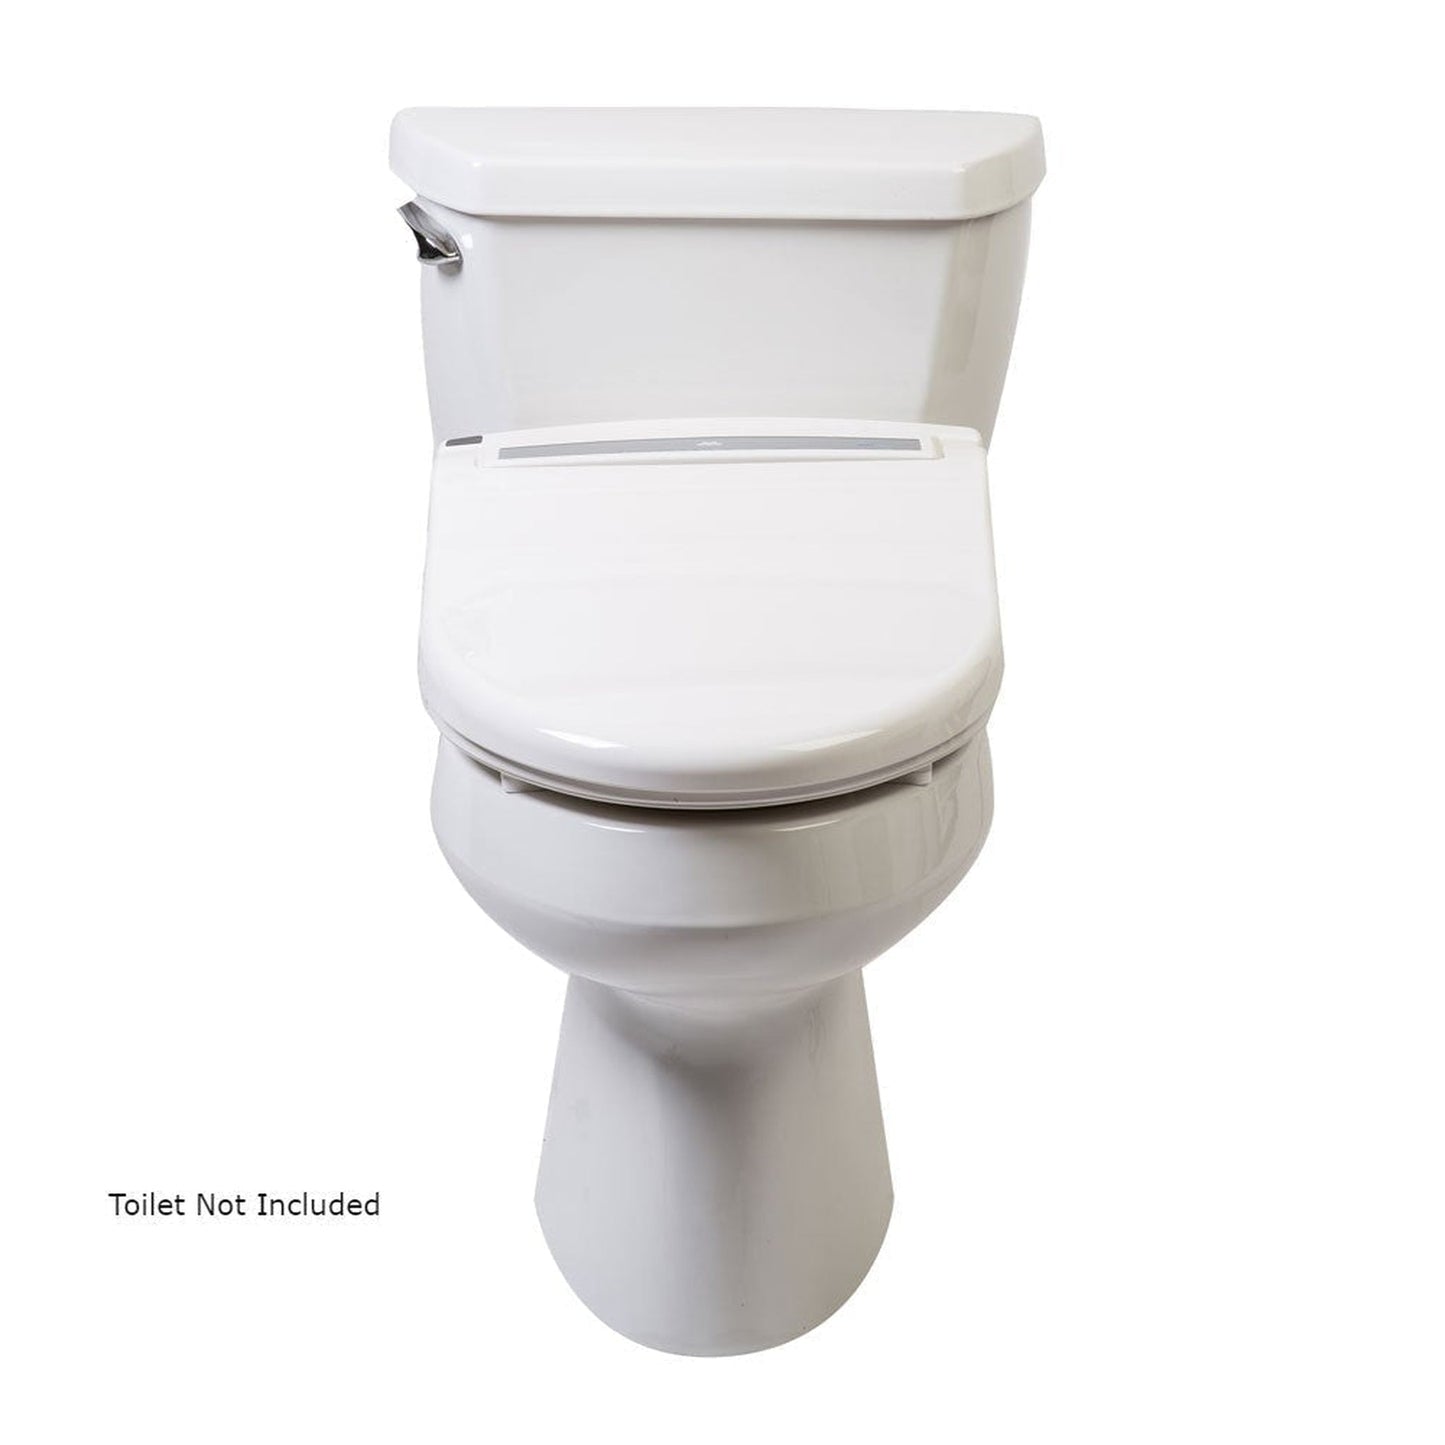 CleanSense DIB-1500R-EW-220 White Advanced Elongated Bidet Seat With LCD Remote Control and Energy Efficient Water Heating System 220V